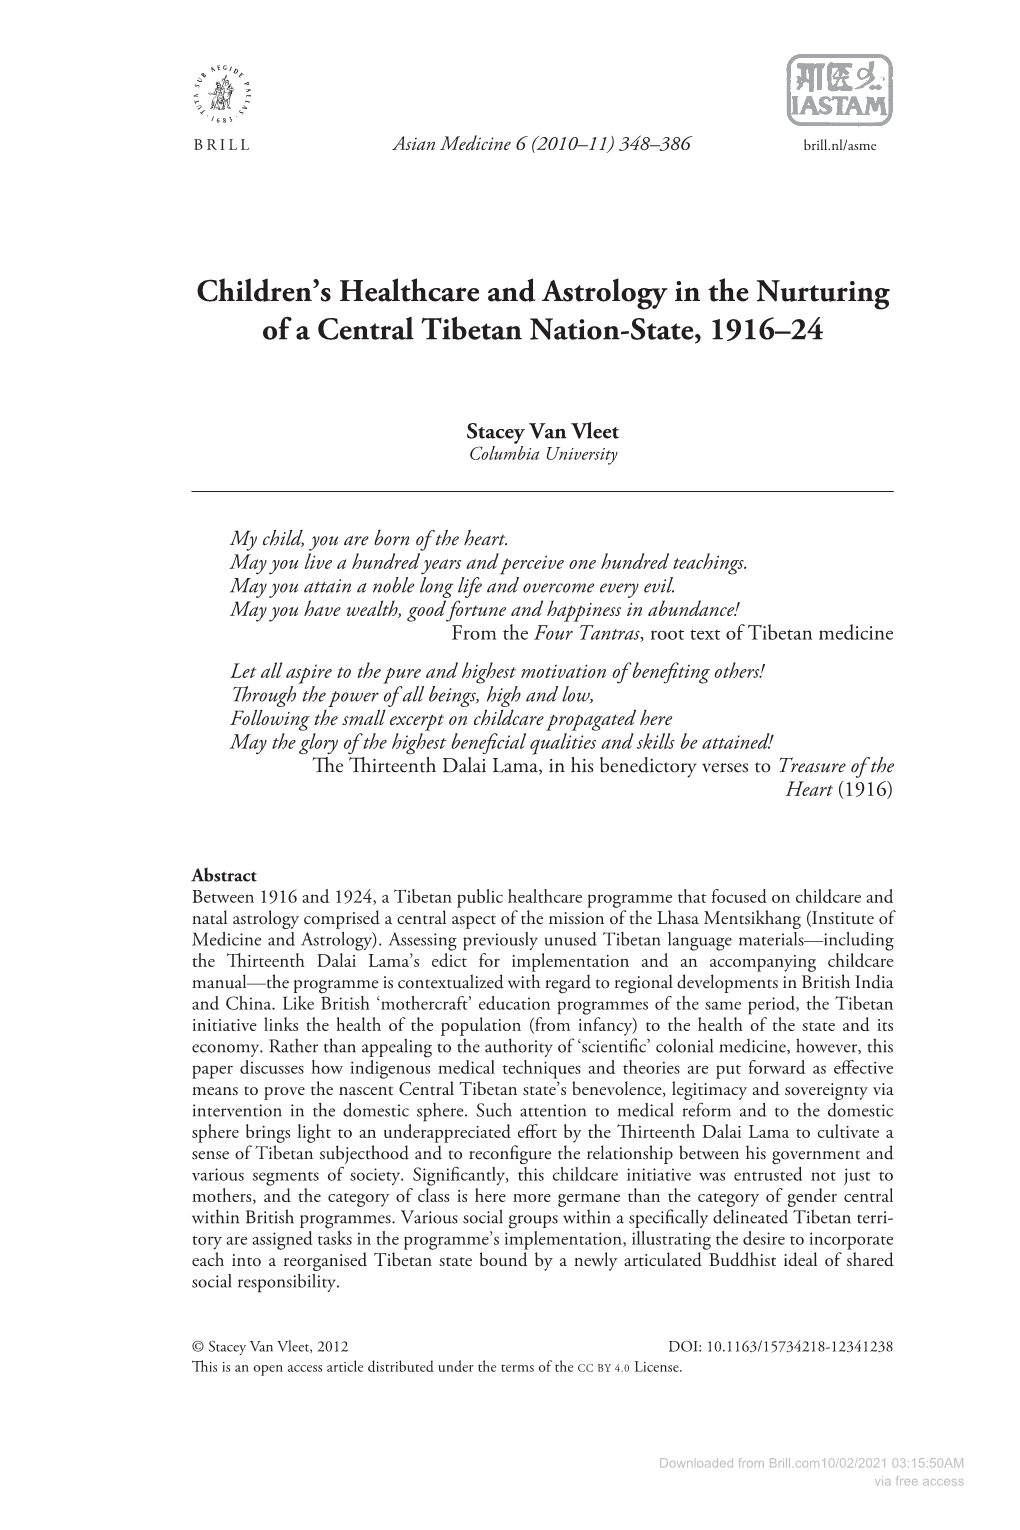 Children's Healthcare and Astrology in the Nurturing of A